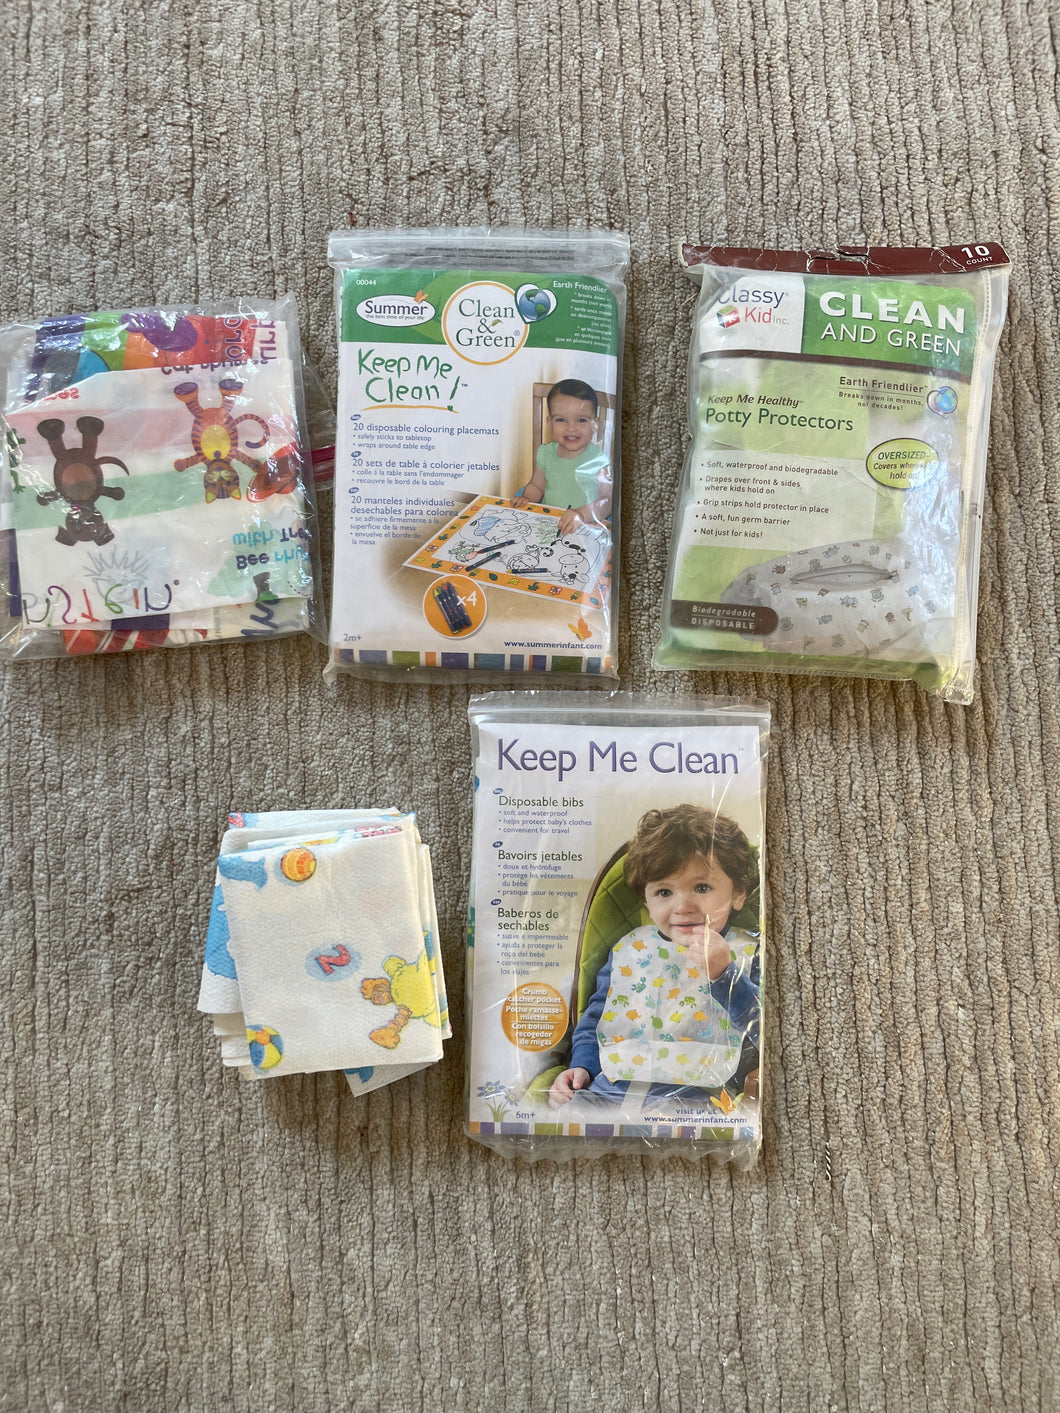 Summer Keep Me Clean disposable bibs, placemats, potty cover and changing pad